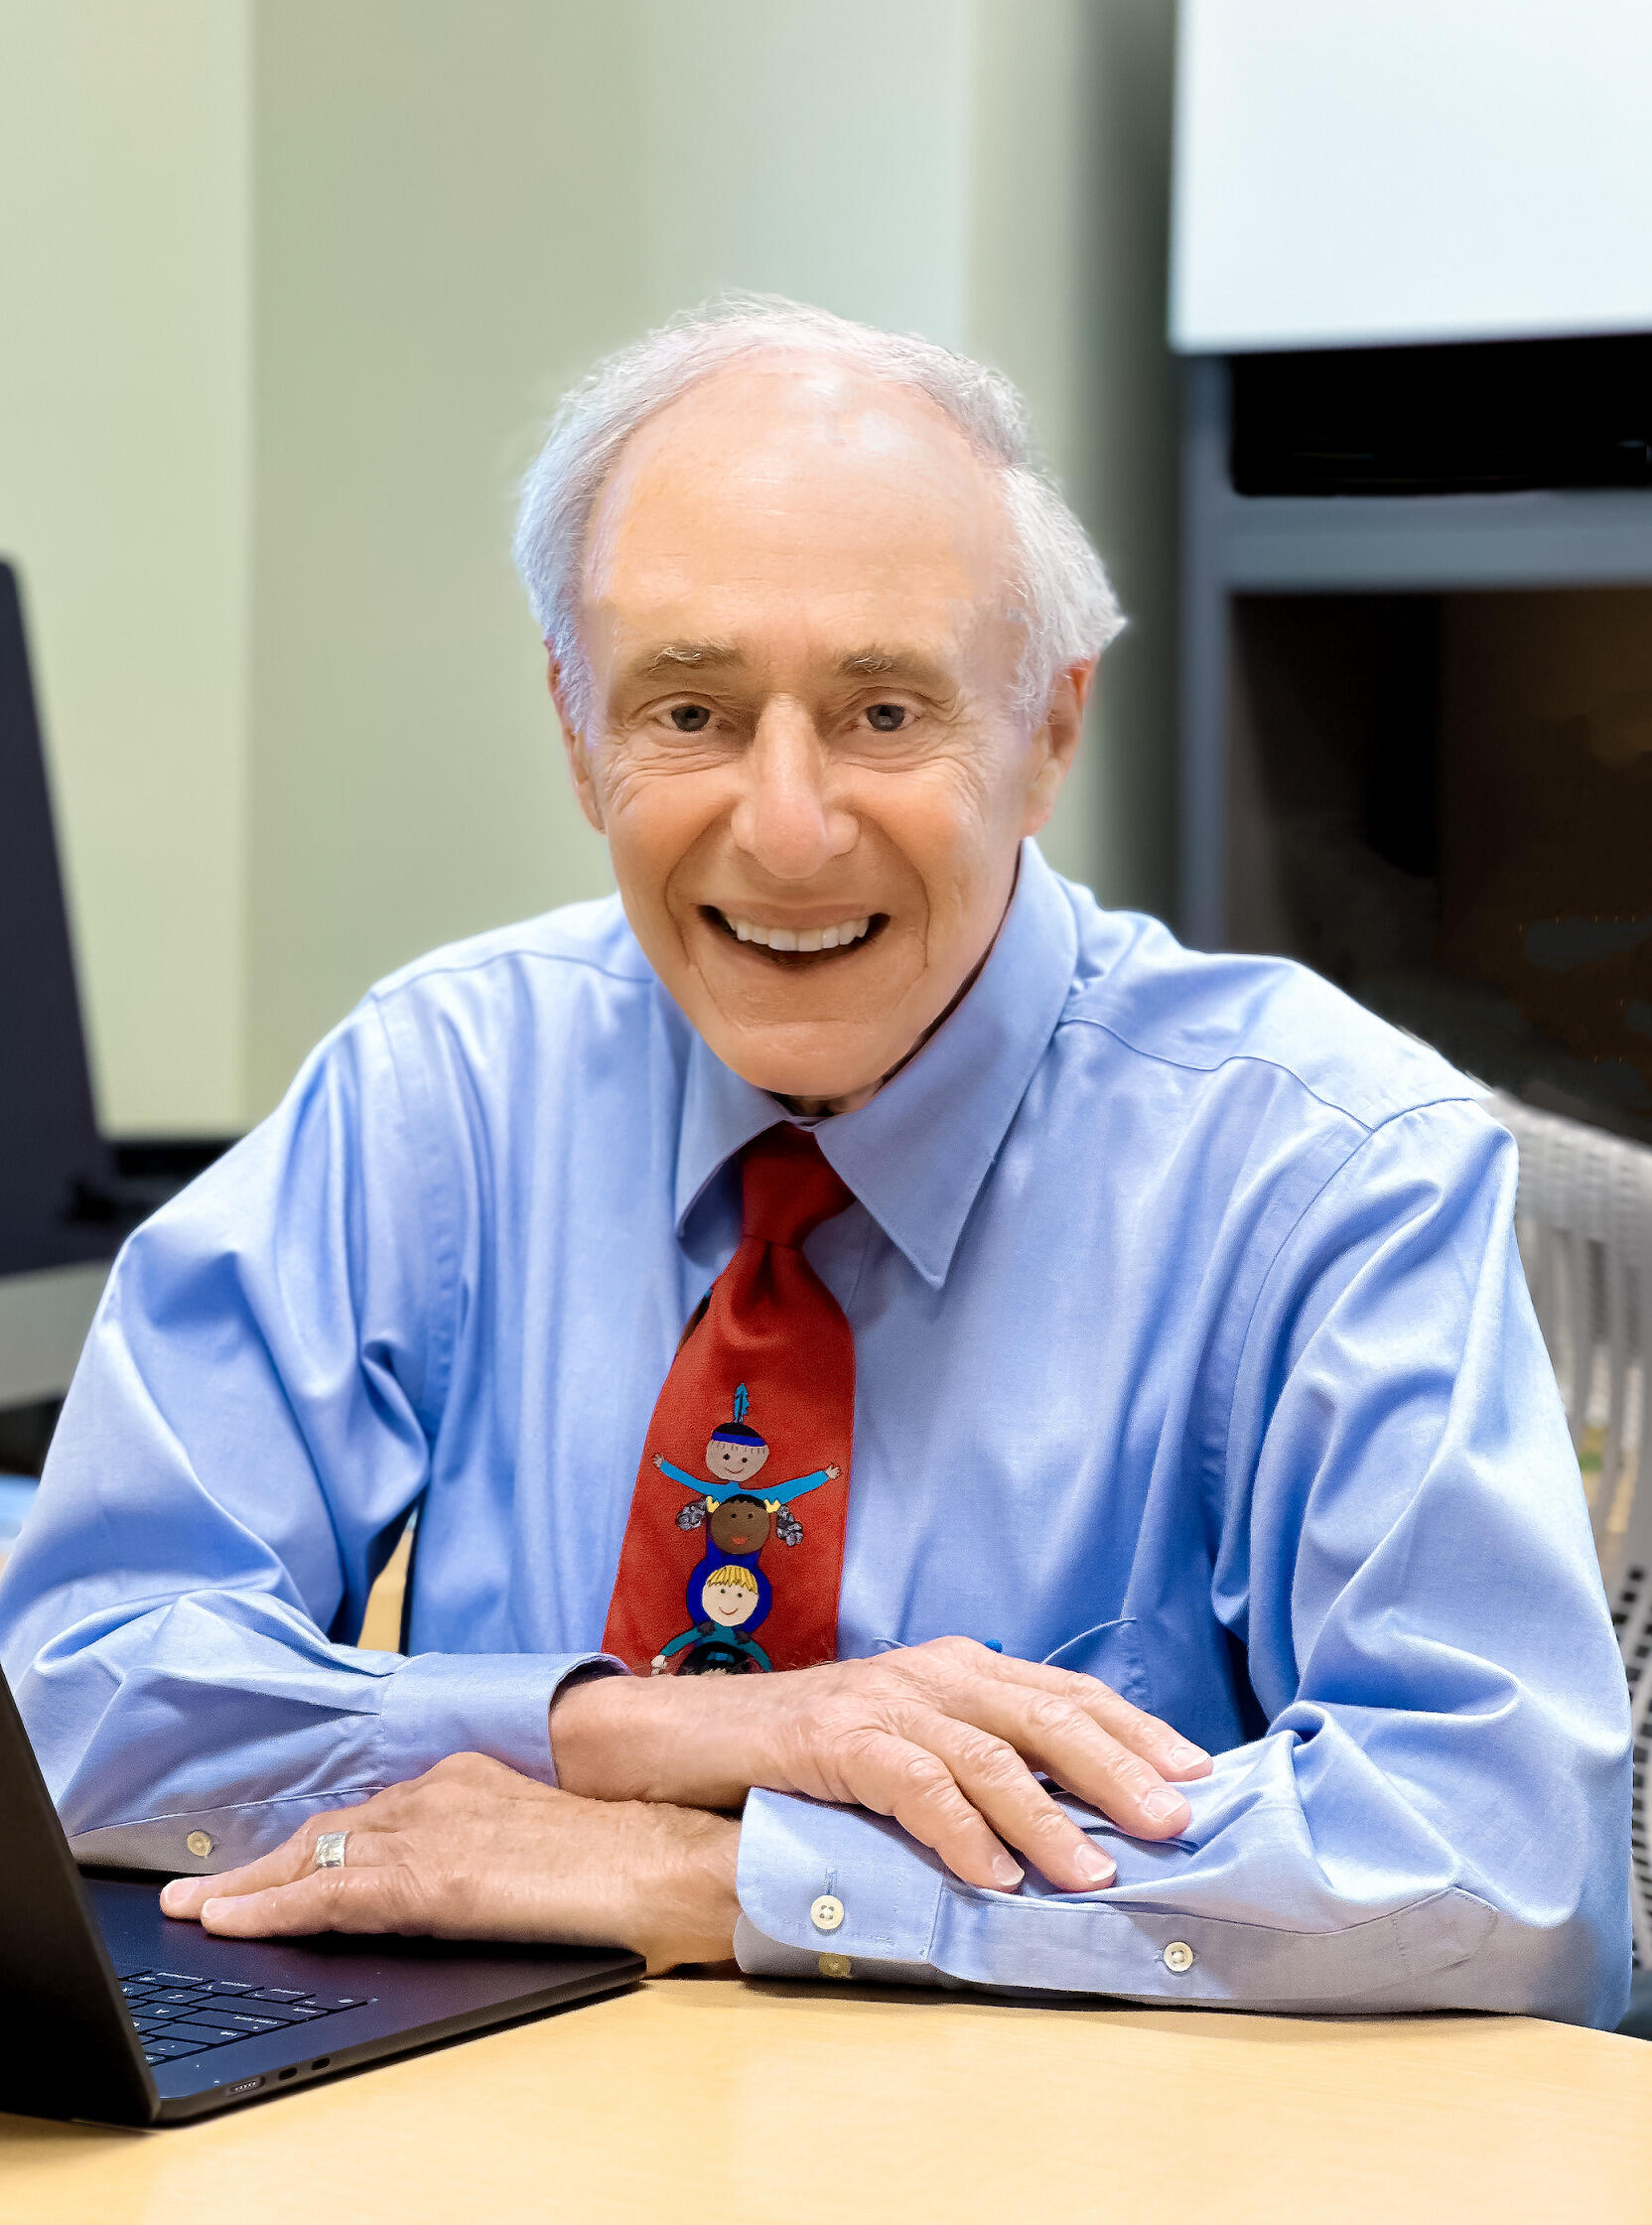 A photo of a man sitting at a desk with his arms crossing in front of him on the desk. 